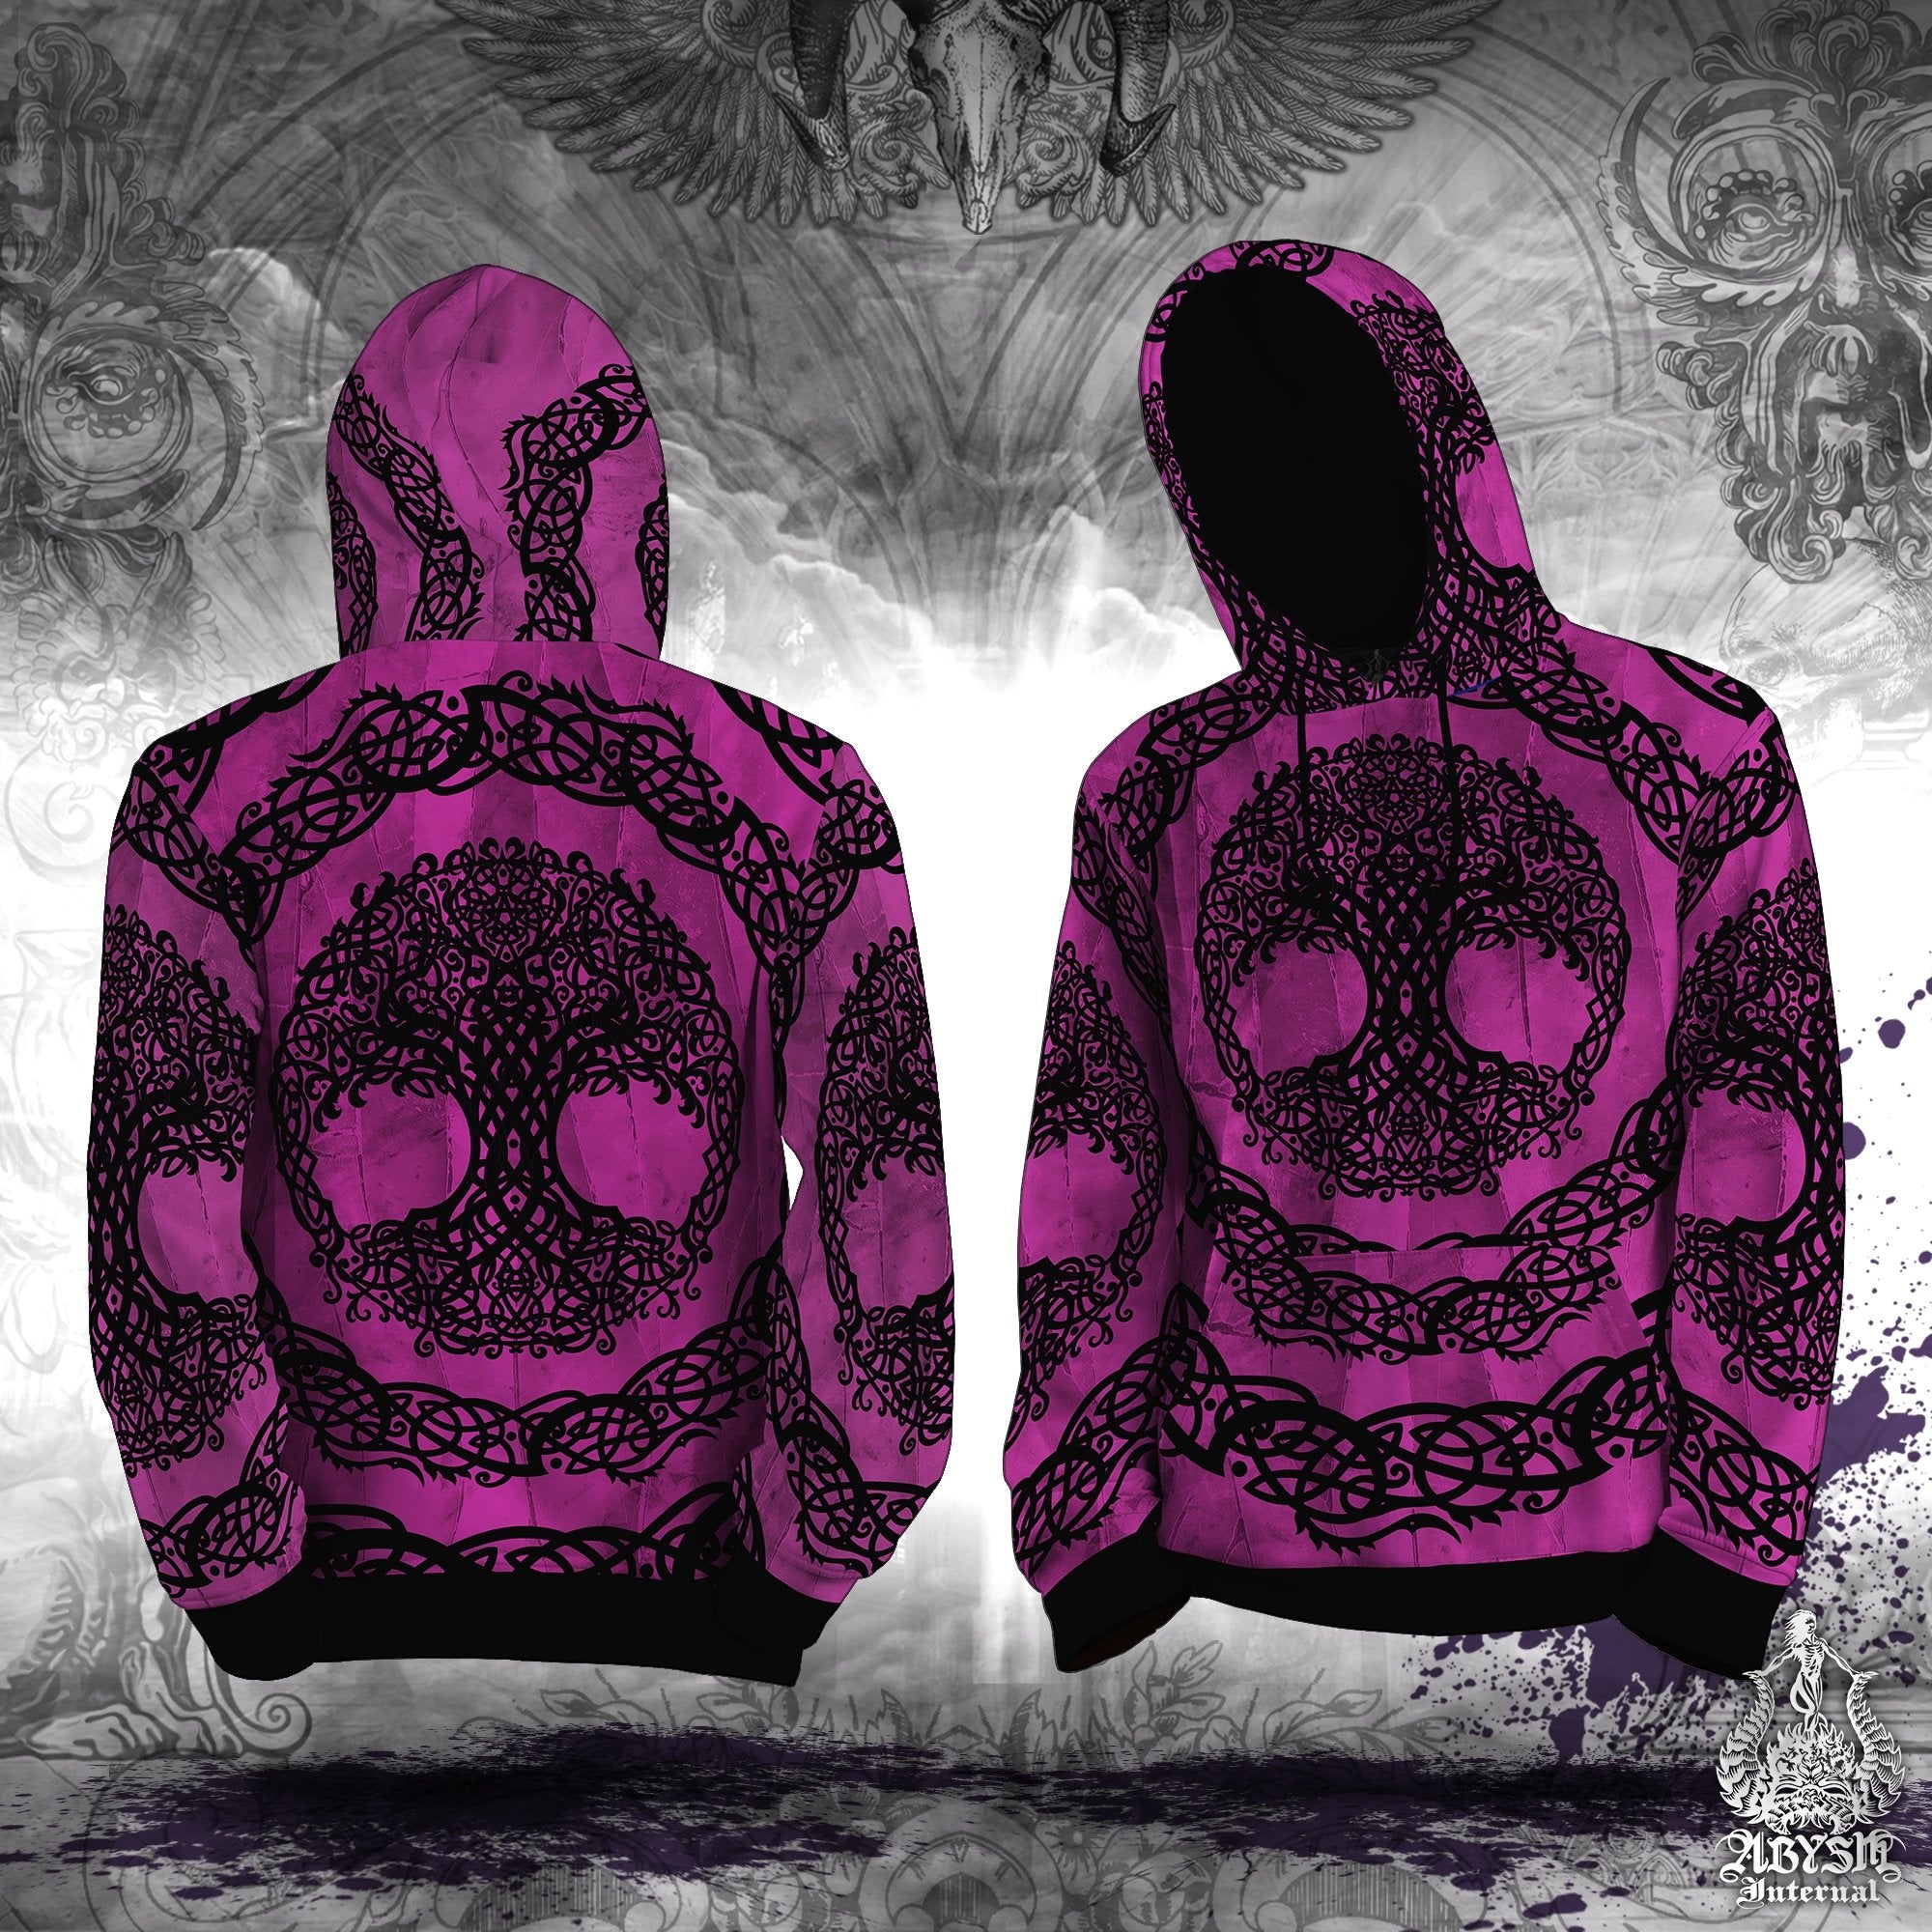 Witchy Hoodie, Wicca Streetwear, Witch Outfit, Pagan Alternative Clothing, Unisex - Pink and Black, Celtic Tree of Life - Abysm Internal